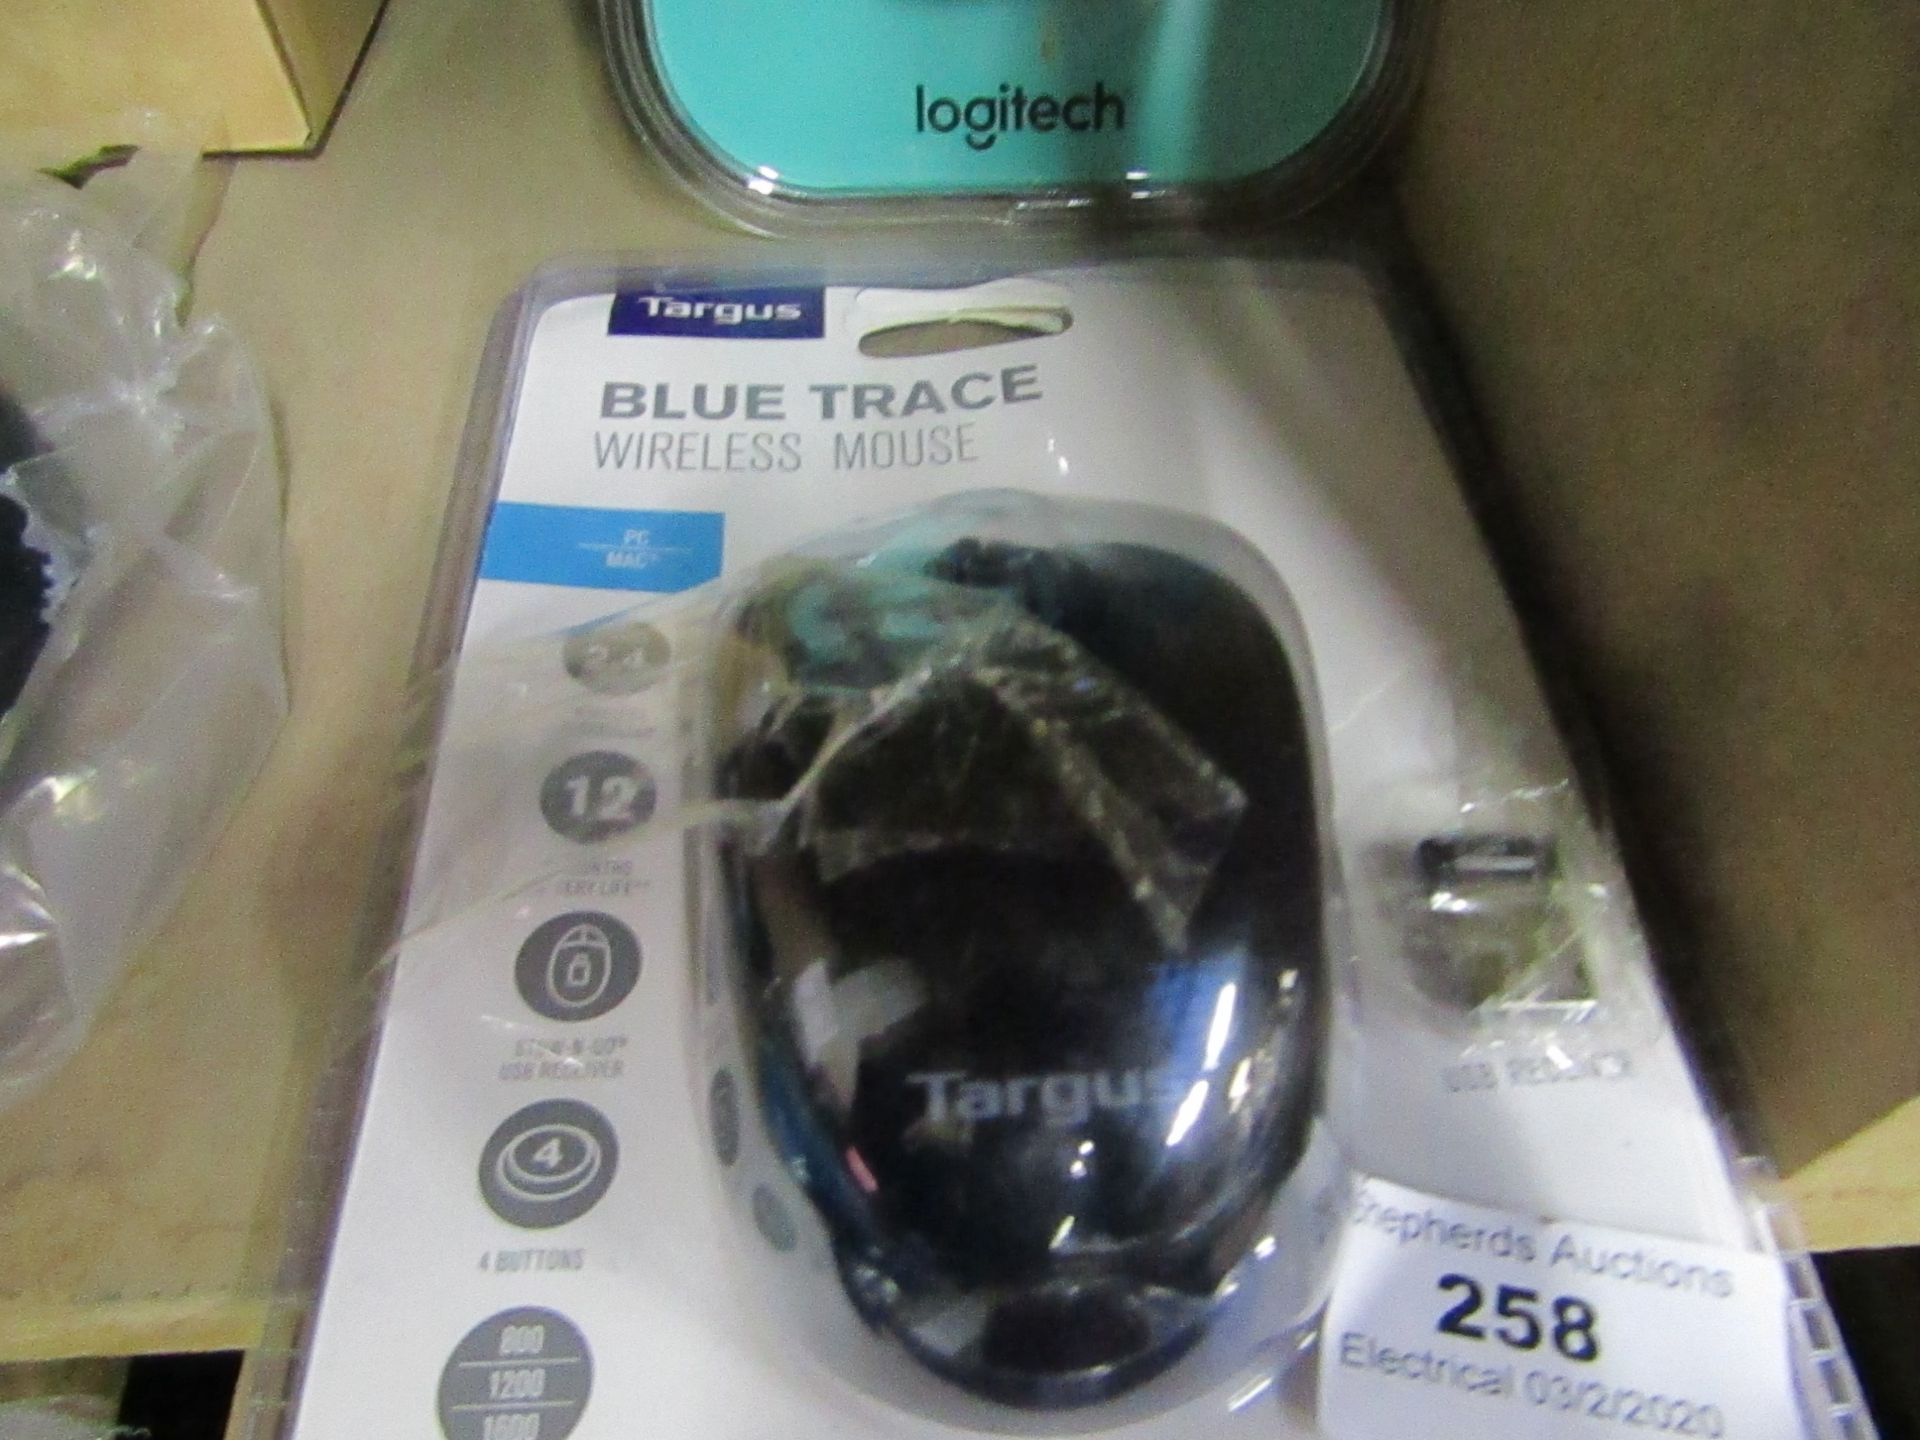 TARGUS - Blue Trace Wireless Mouse - Untested and packaged.